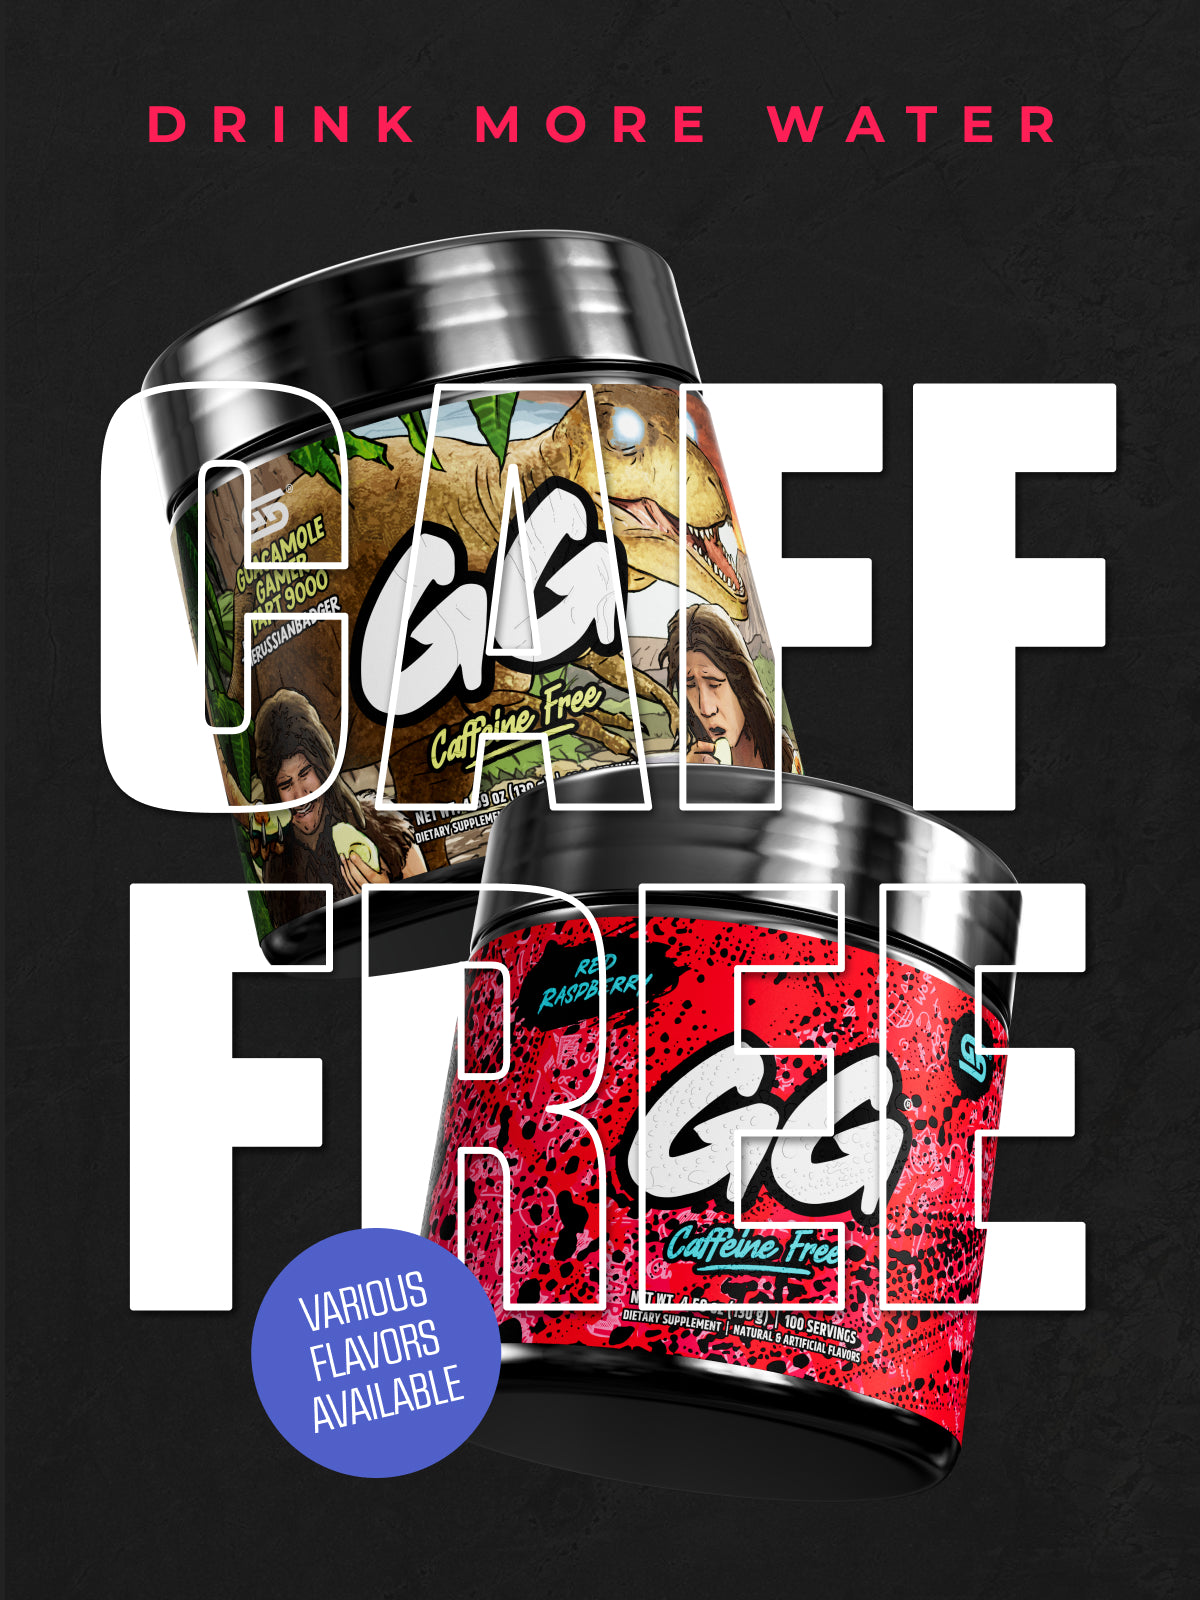 G FUEL vs. Gamer Supps: Which Should I Buy?